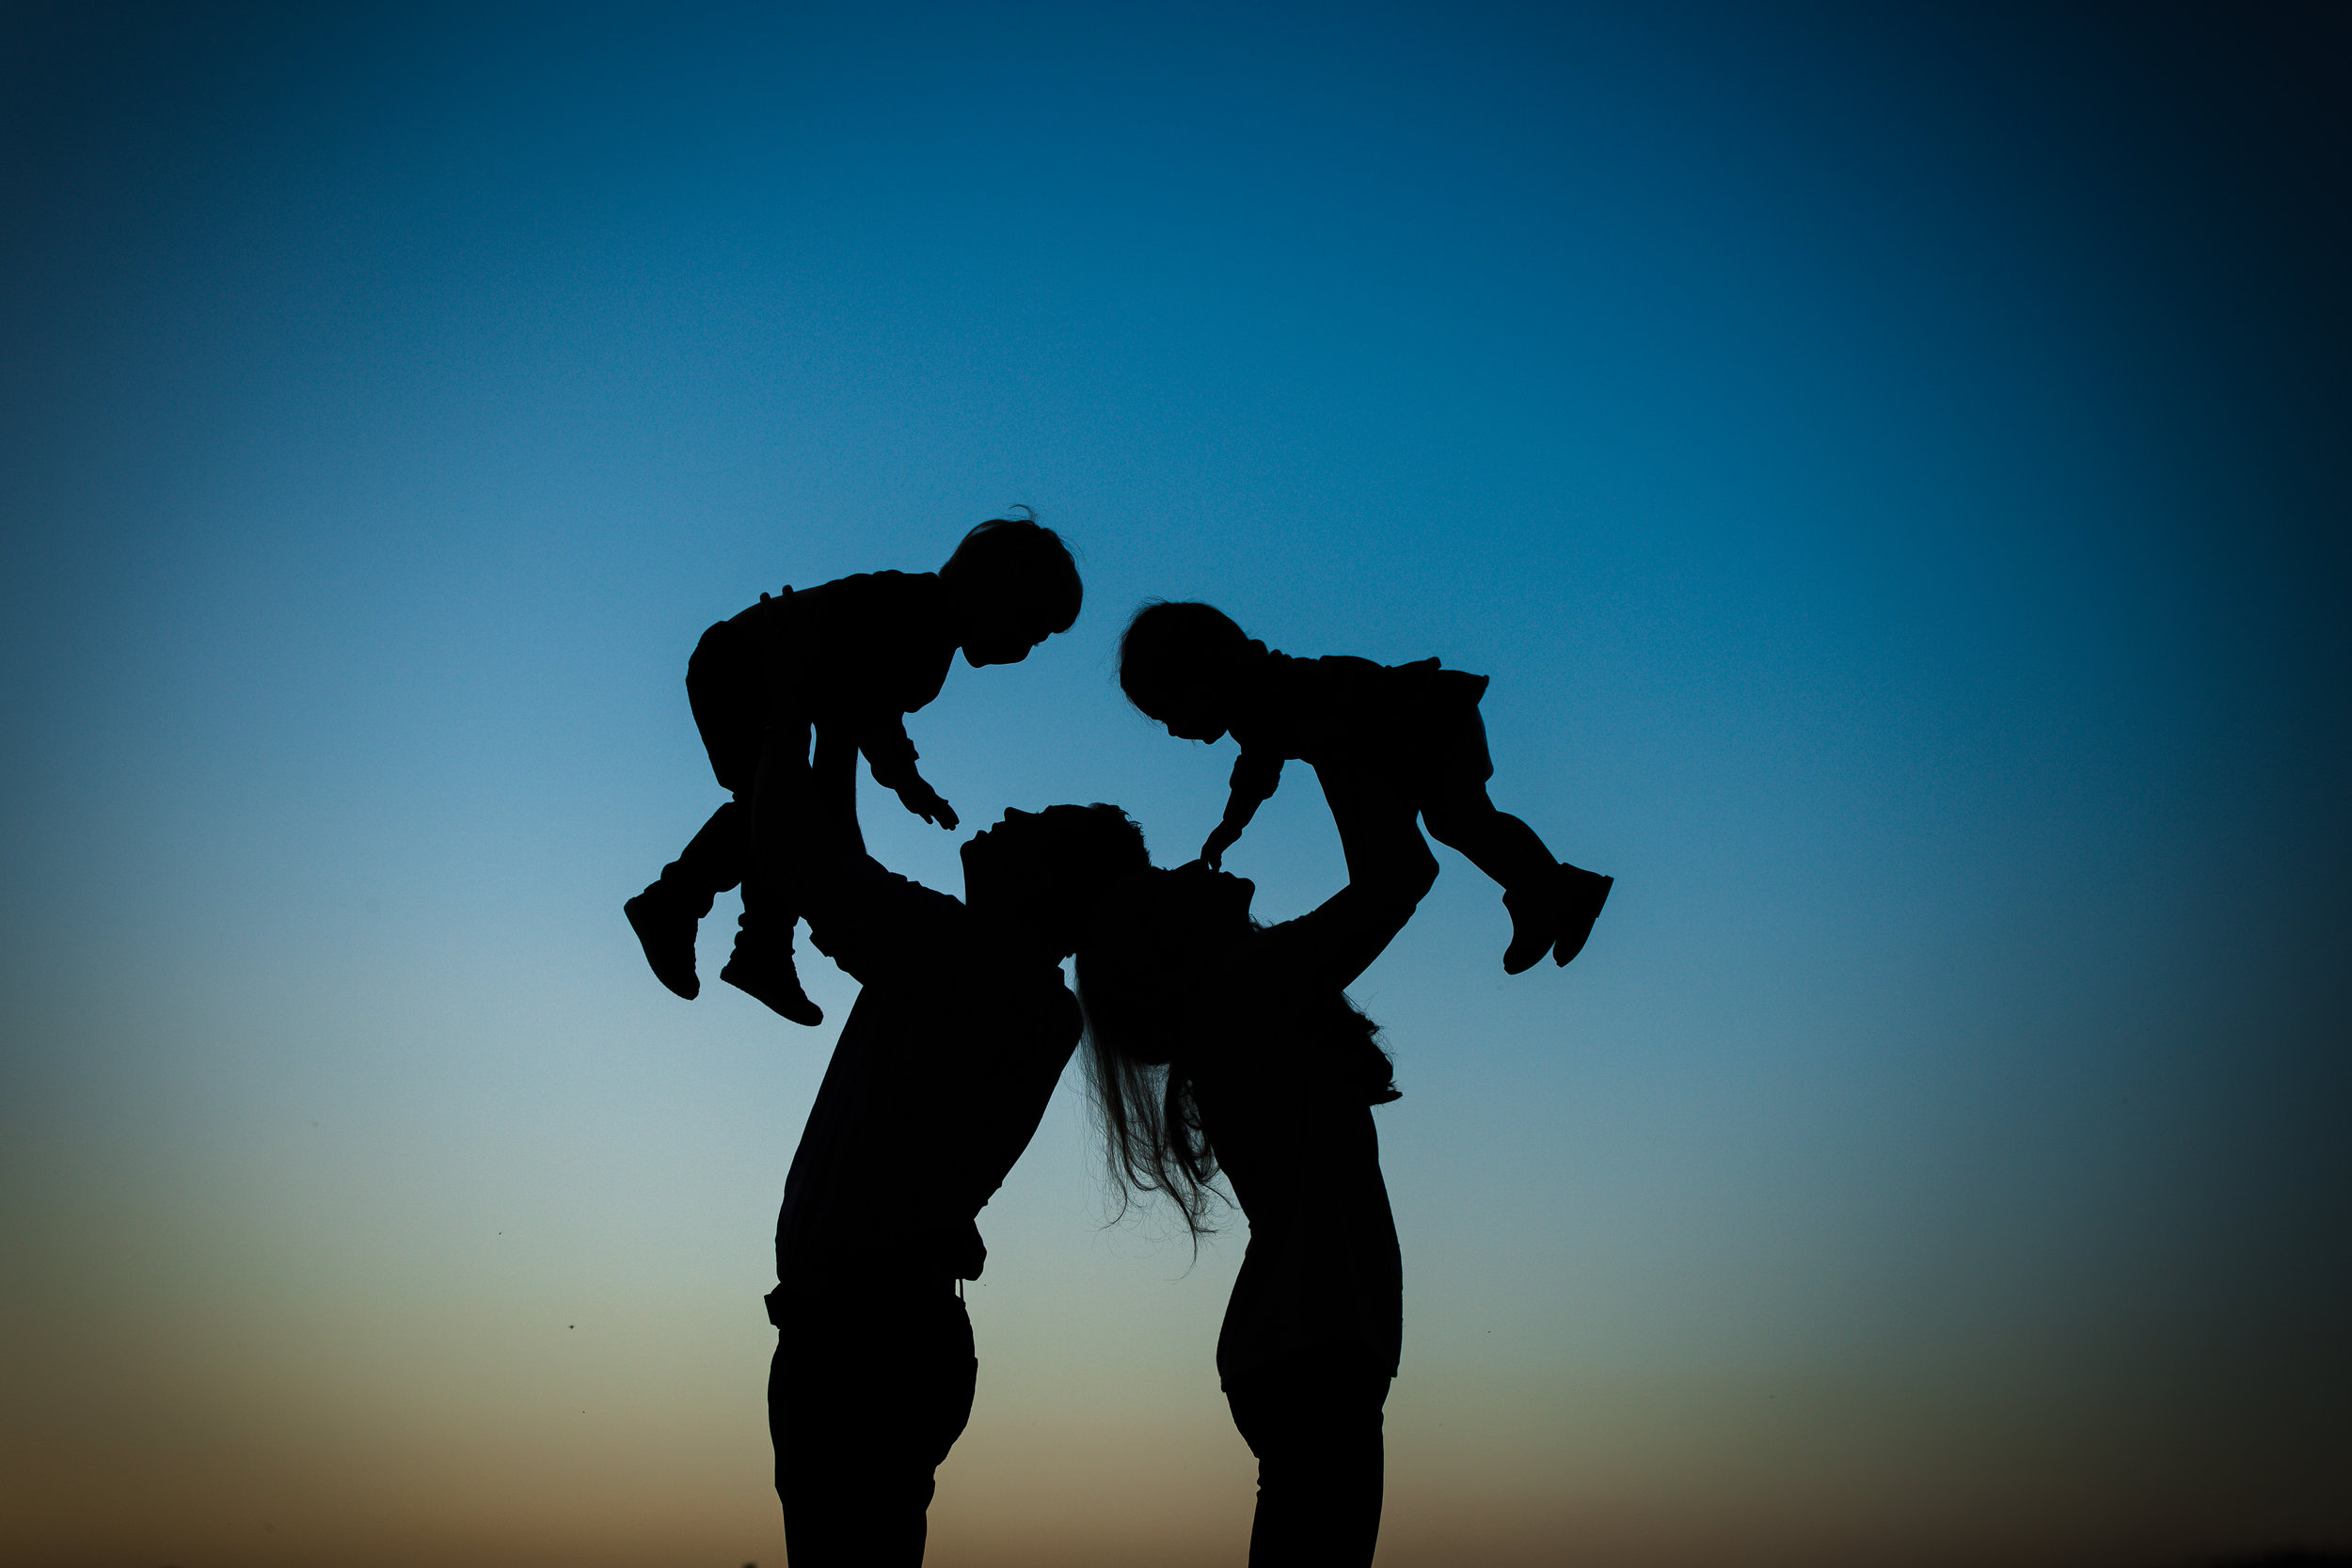 silhouette of family